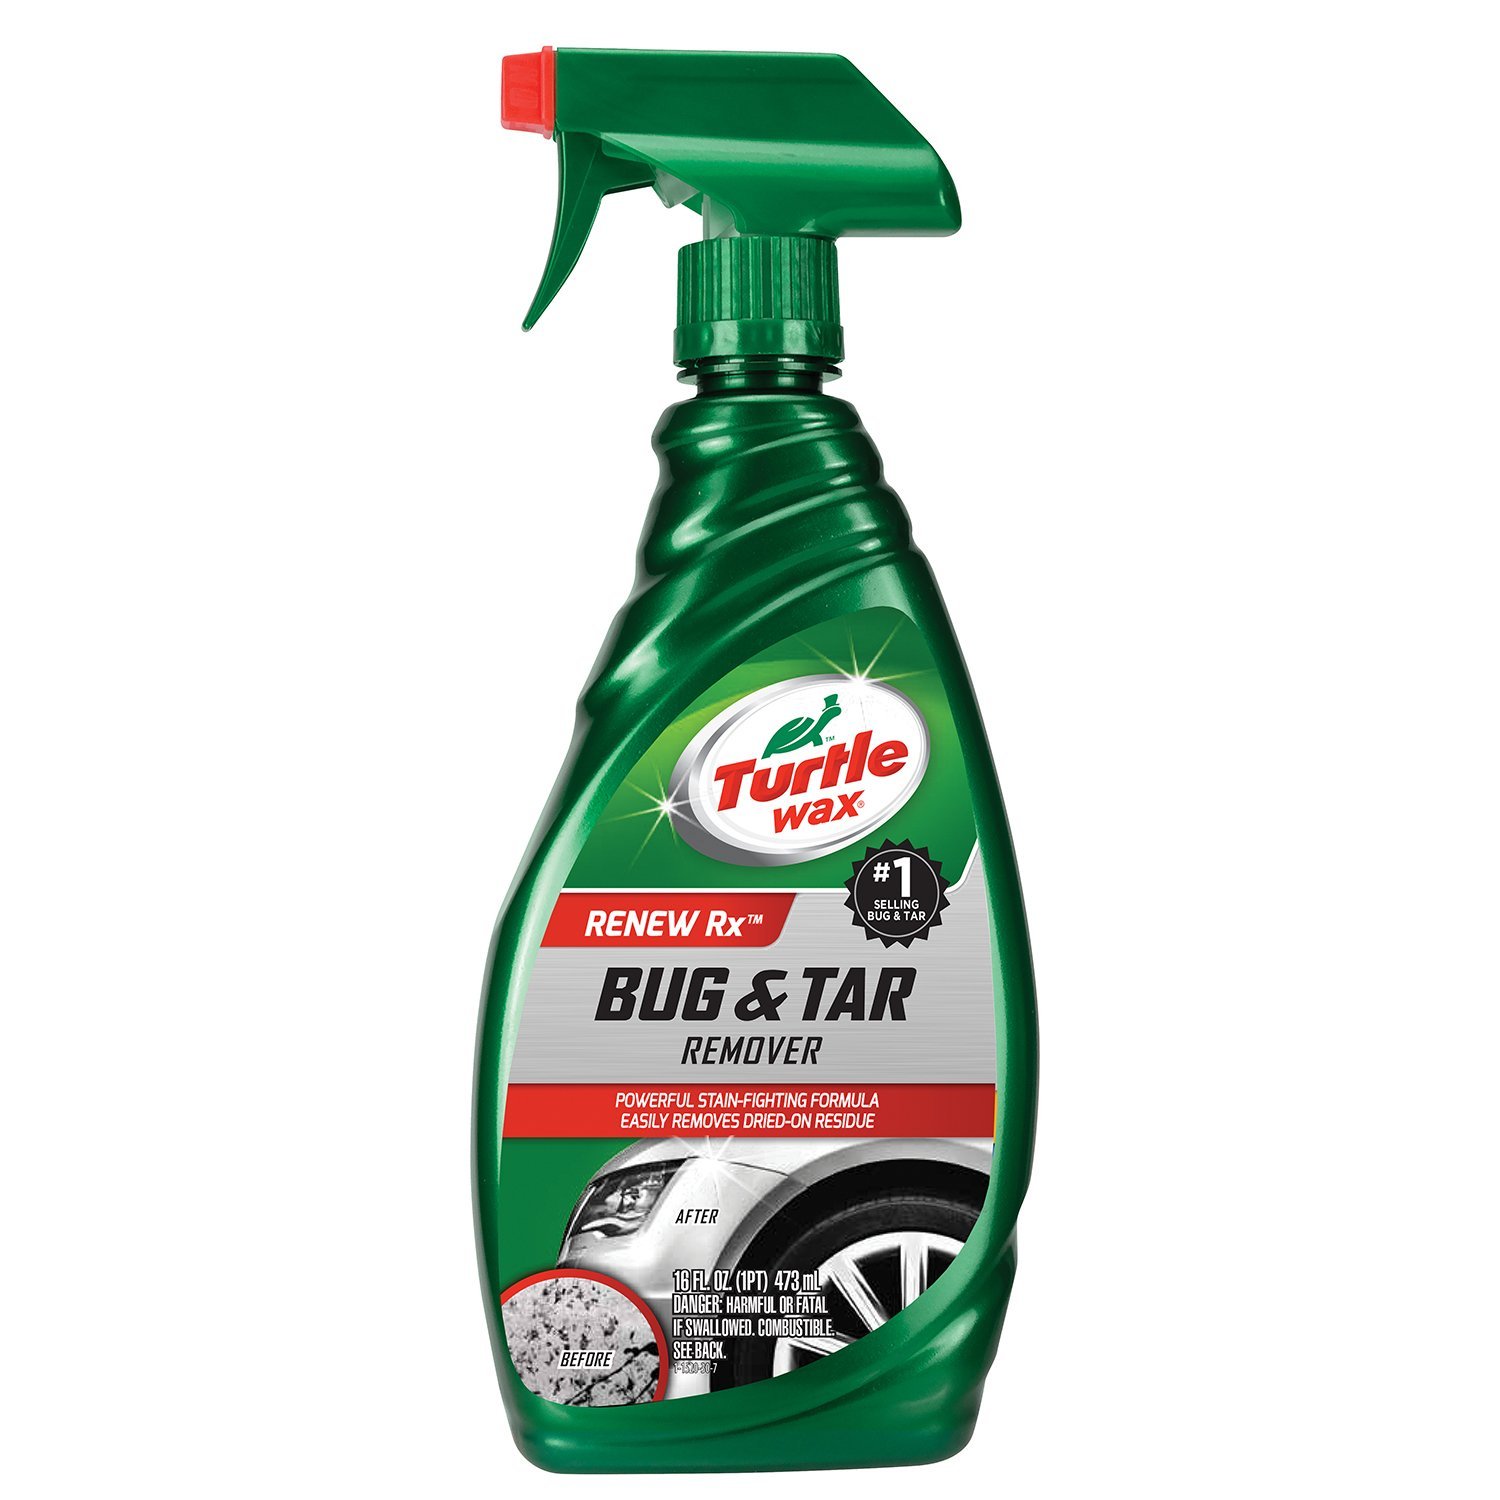 Bug & Tar Remover Made in USA